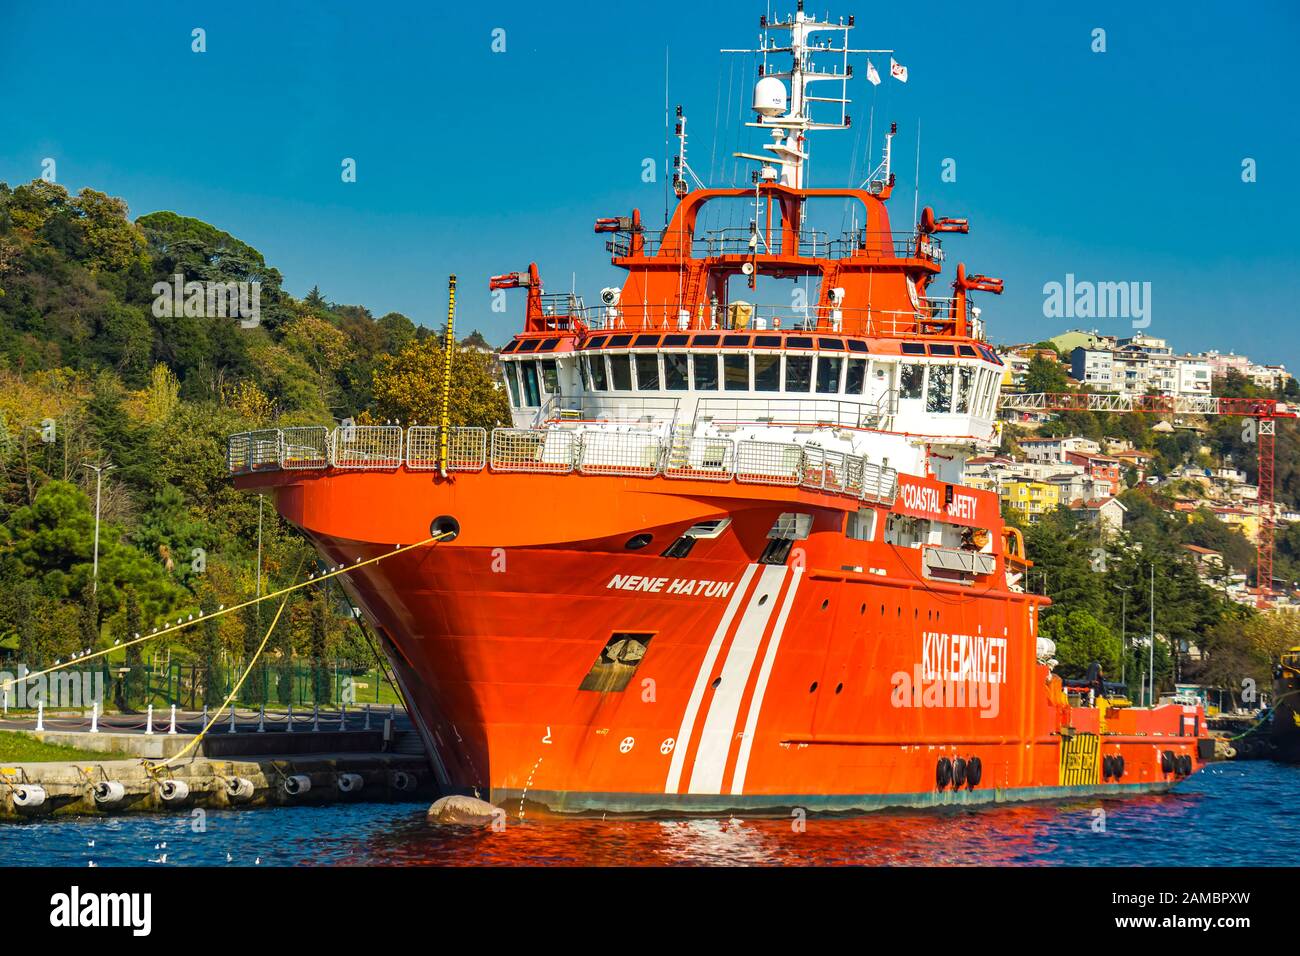 ISTANBUL, TURKEY - NOVEMBER 9, 2019: Nene Hatun ship in Istanbul, Turkey. It is an Turkish Search and Rescue Vessel built in 2015. Stock Photo